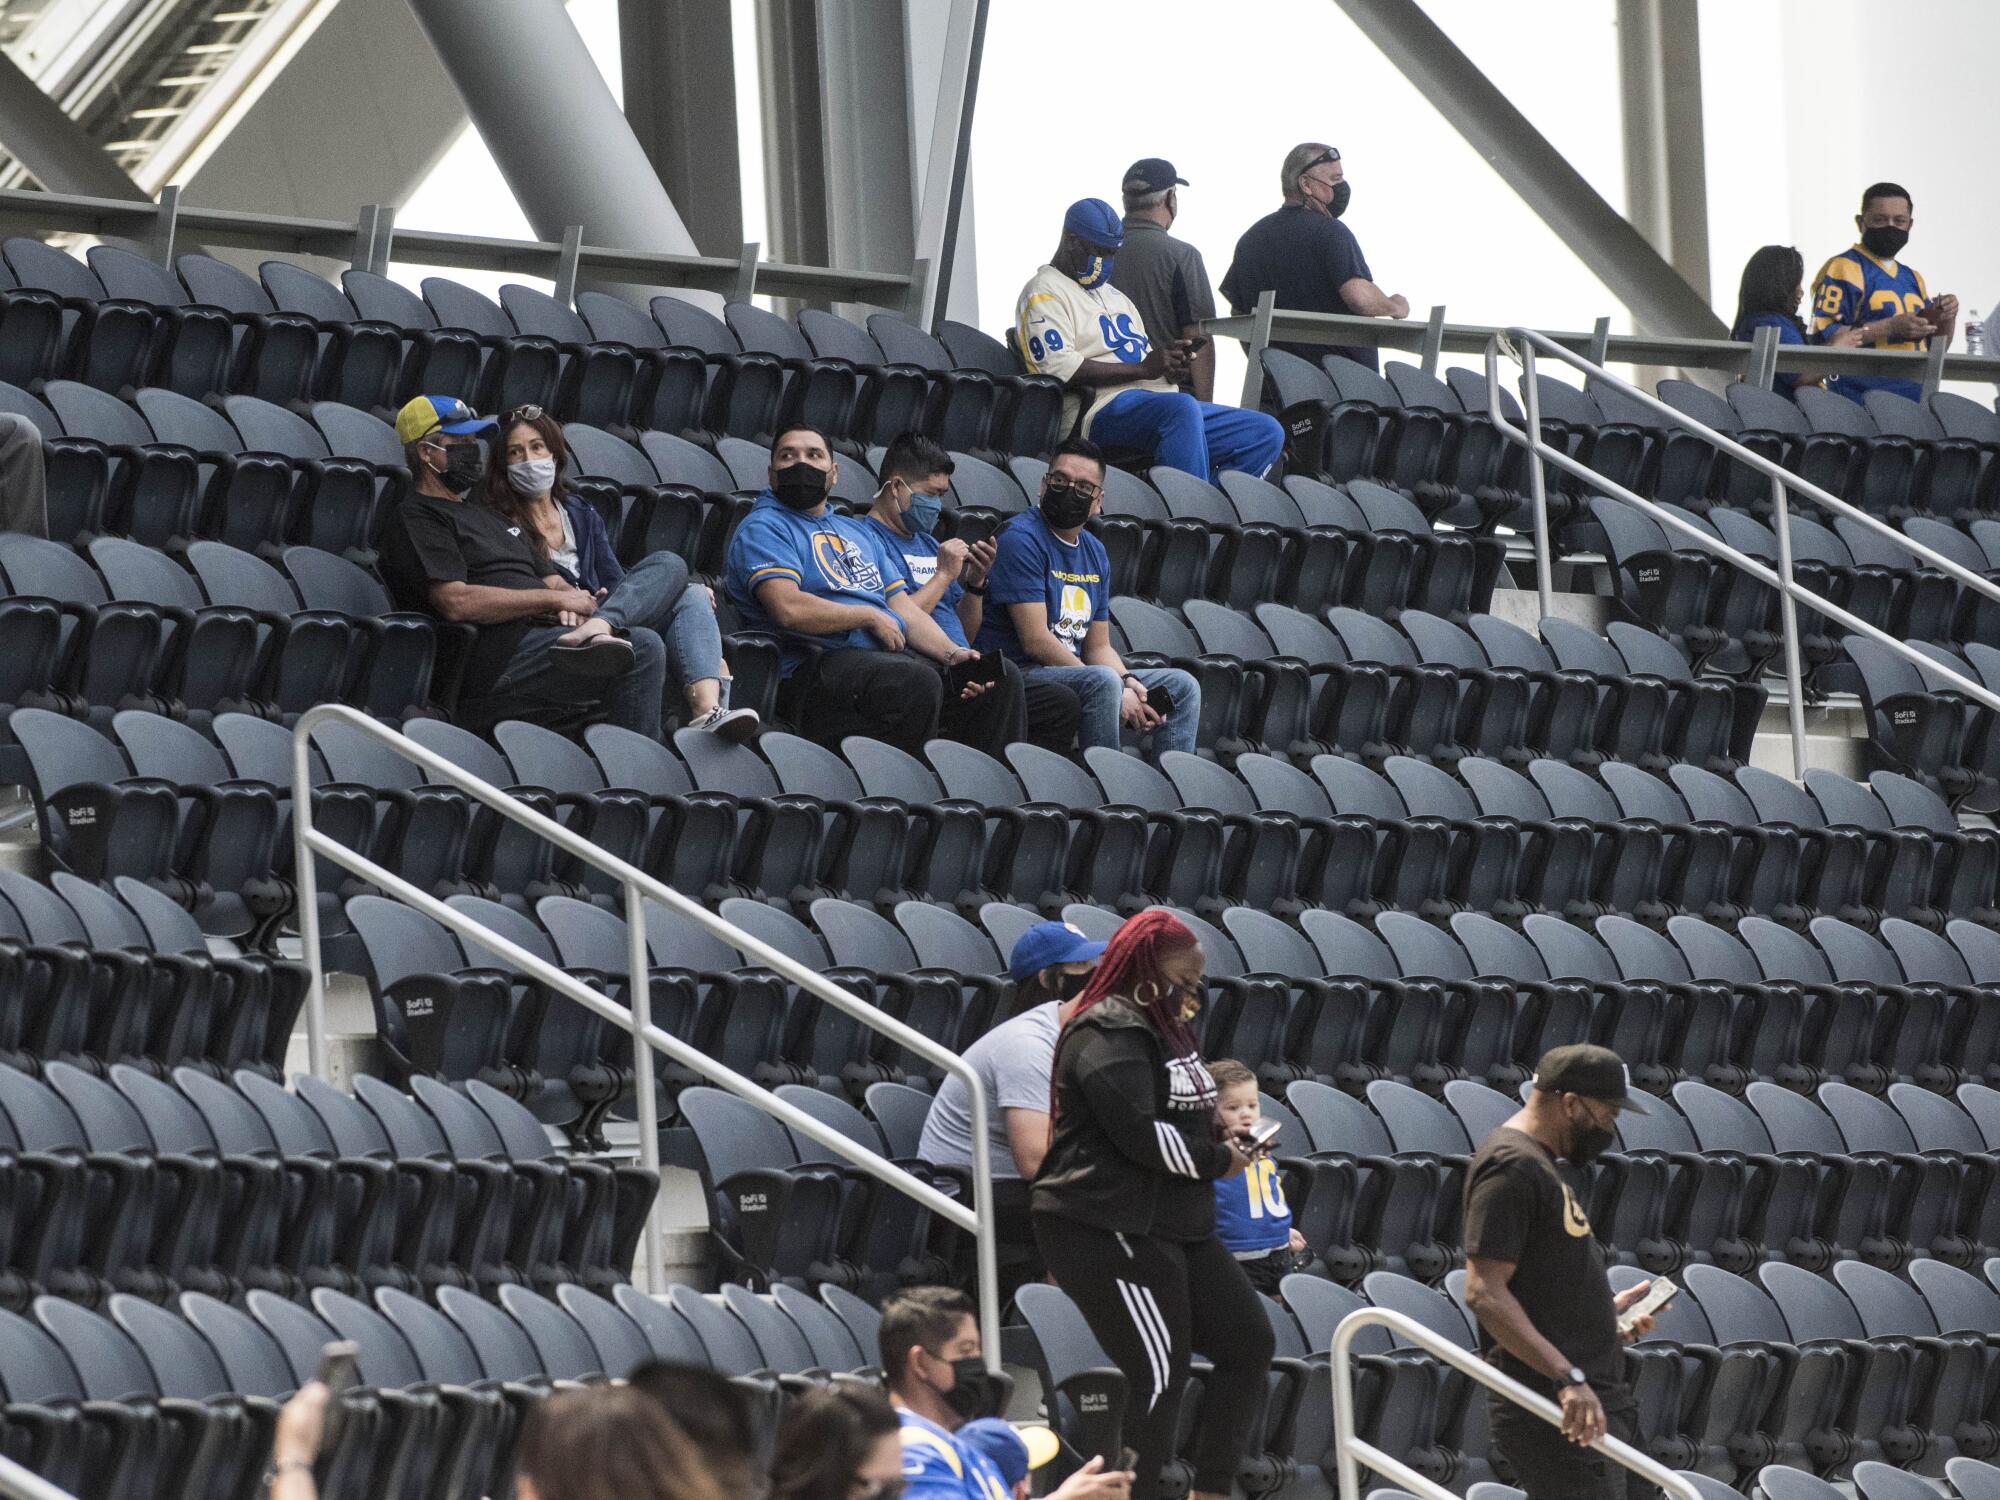 Rams season ticket holders sit in their seats for the first time at SoFi Stadium in Inglewood on Saturday.